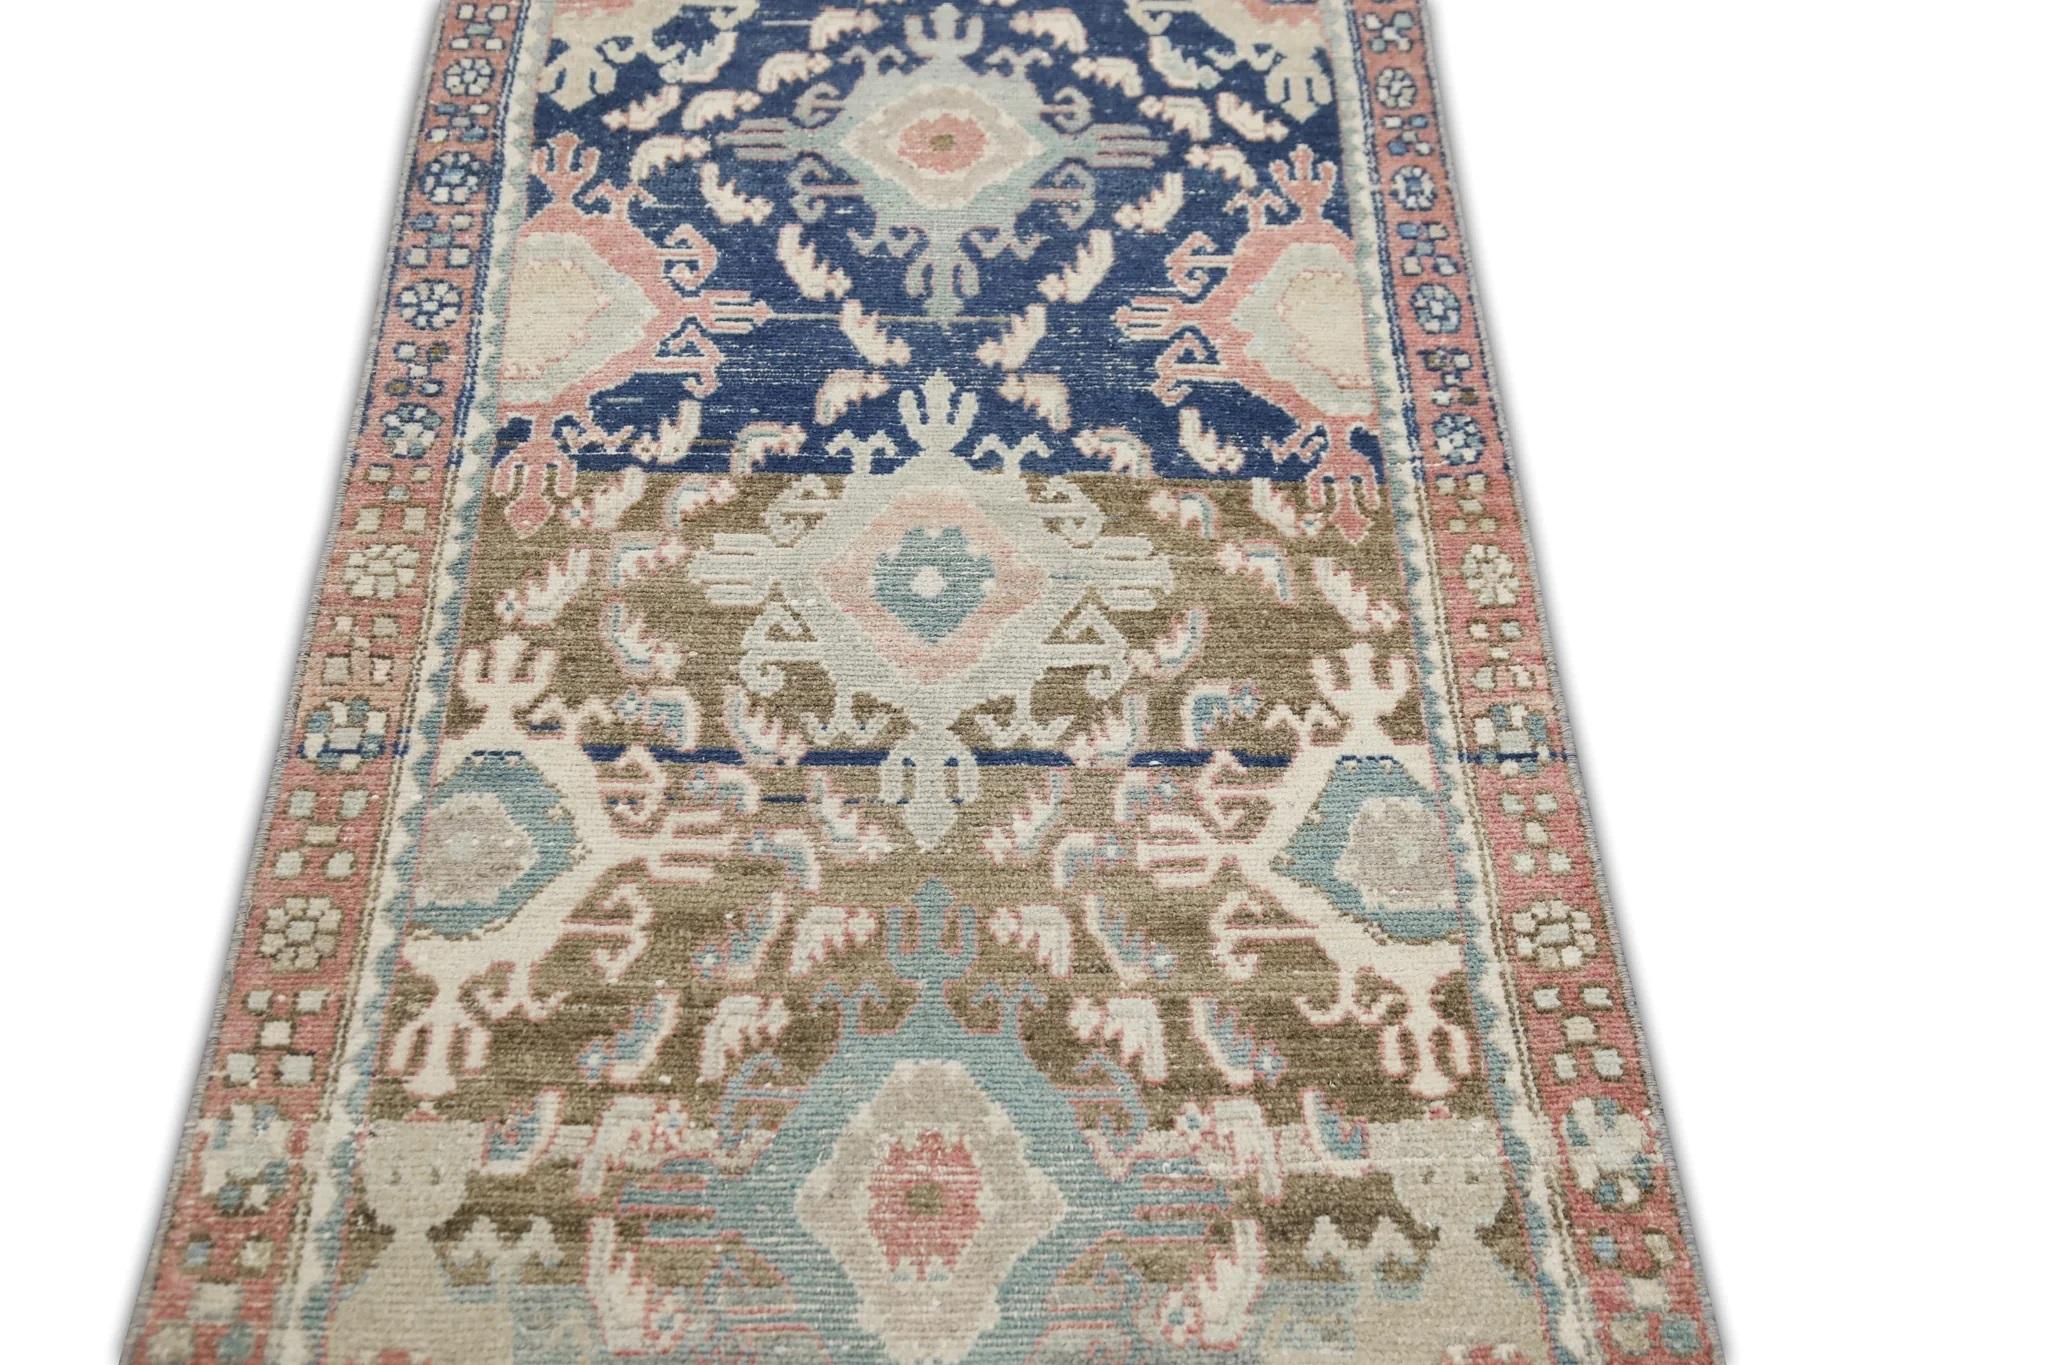 Introducing a stunning piece of history to your home décor, this vintage  hand knotted wool rug is a true masterpiece. Crafted by skilled artisans using traditional techniques, this rug features a beautiful combination of natural dyes that create a